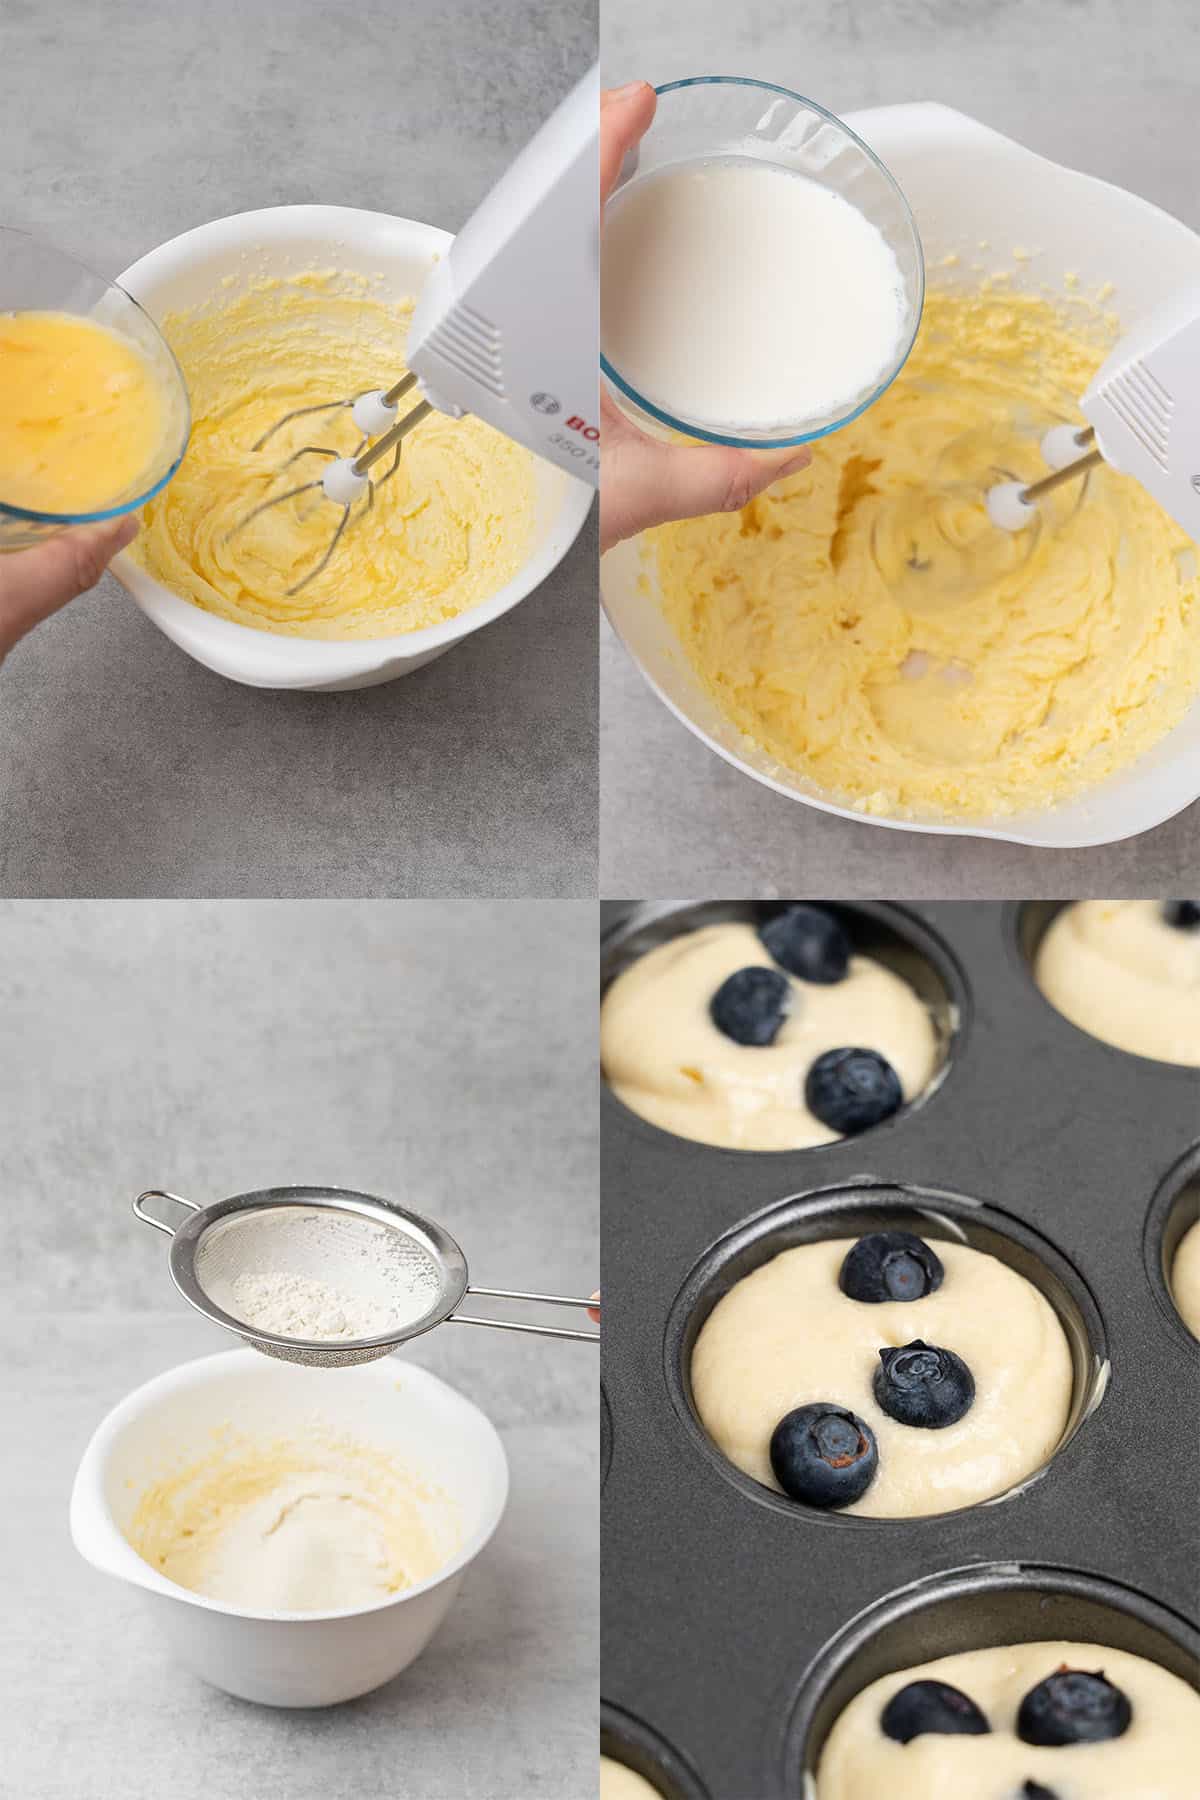 Mini blueberry muffin step-by-step assembly.